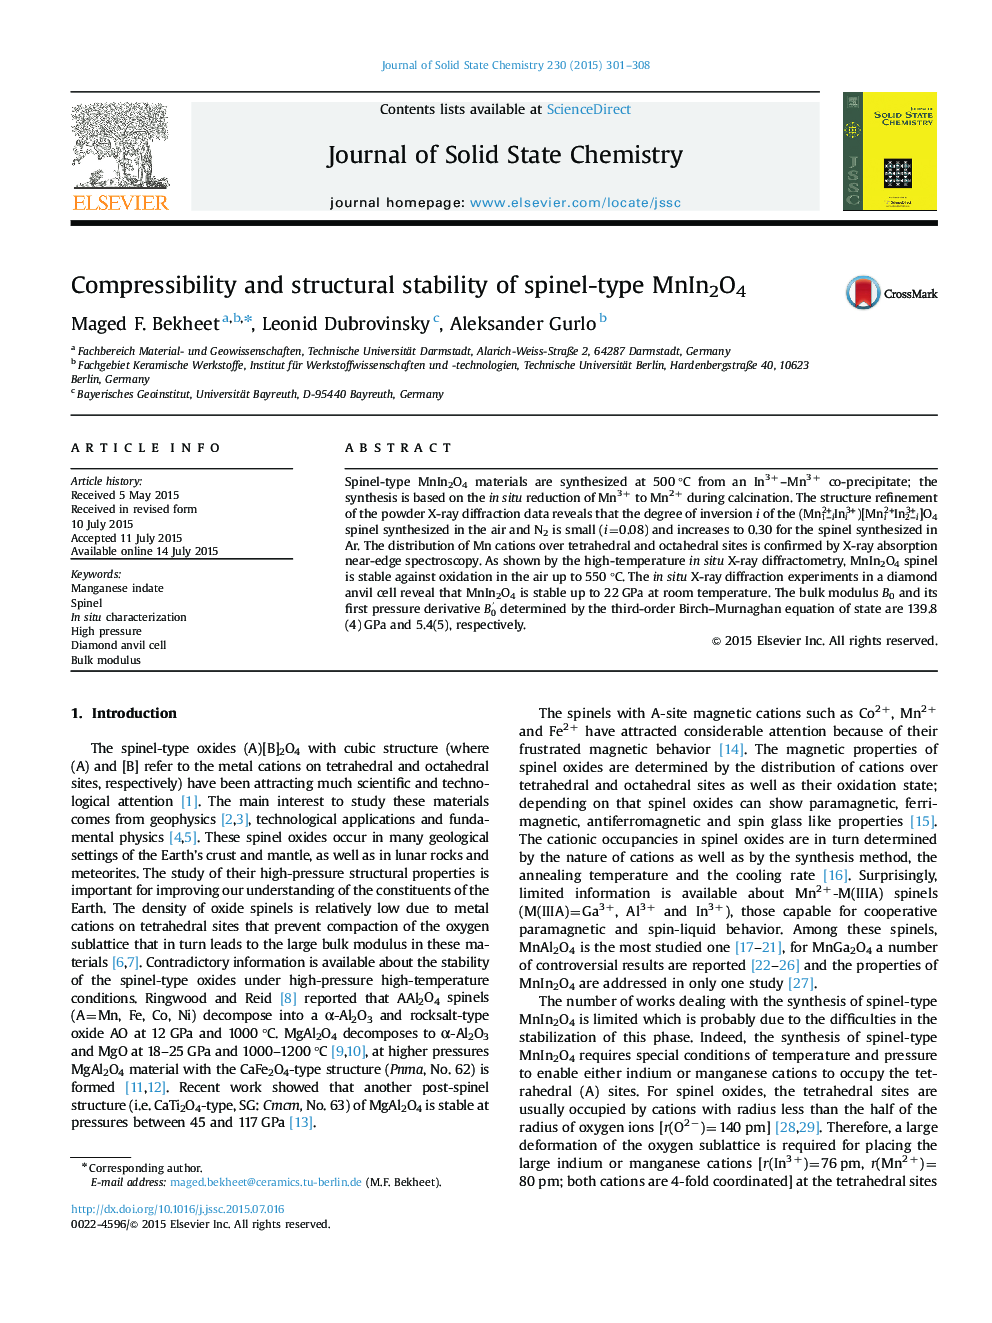 Compressibility and structural stability of spinel-type MnIn2O4